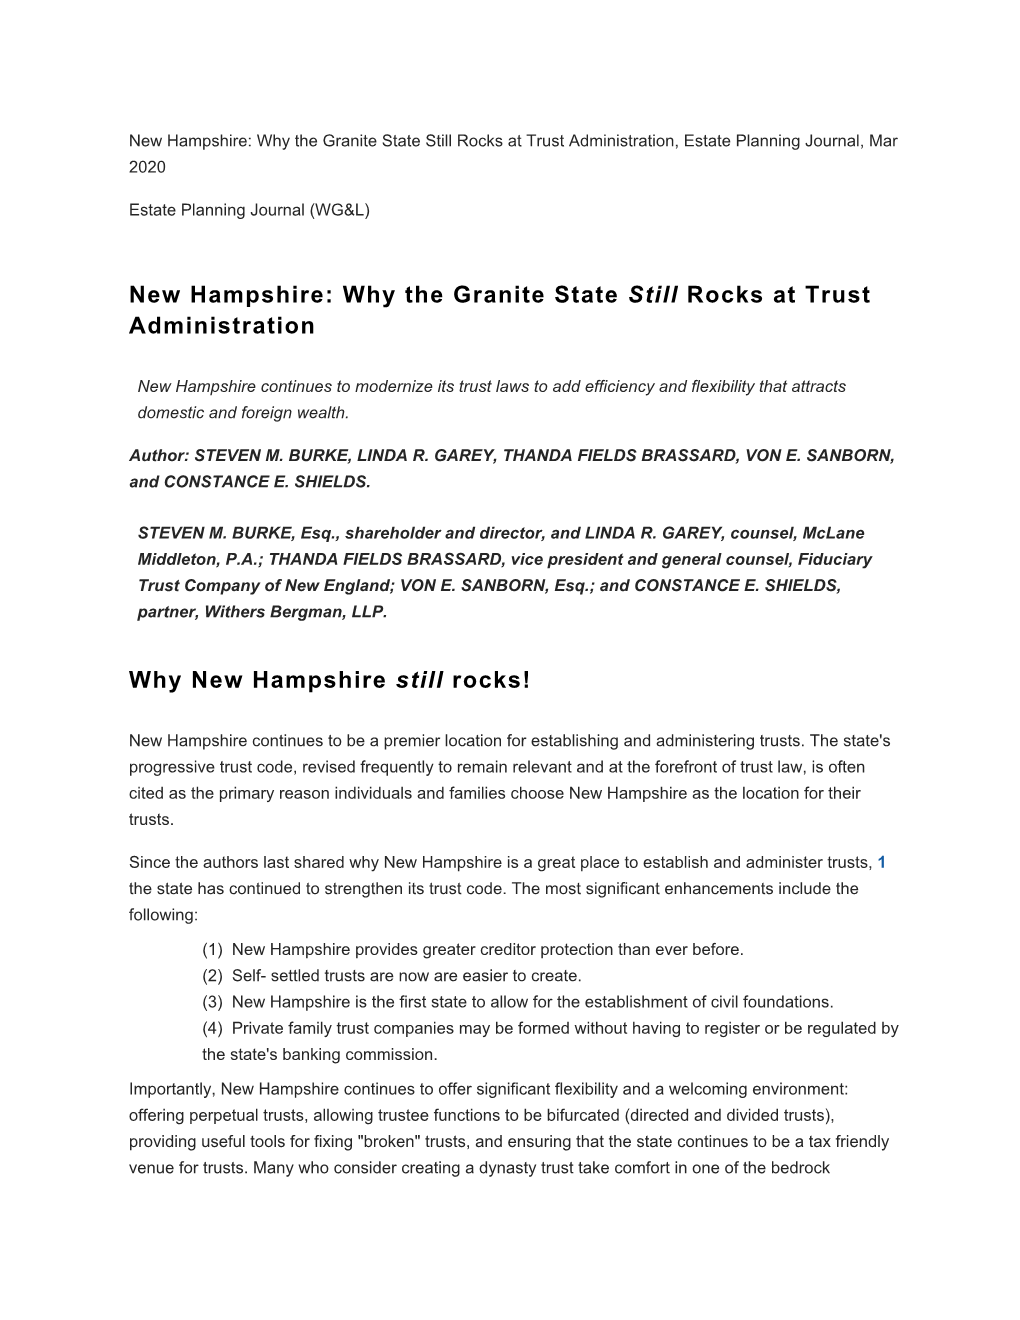 New Hampshire: Why the Granite State Still Rocks at Trust Administration, Estate Planning Journal, Mar 2020